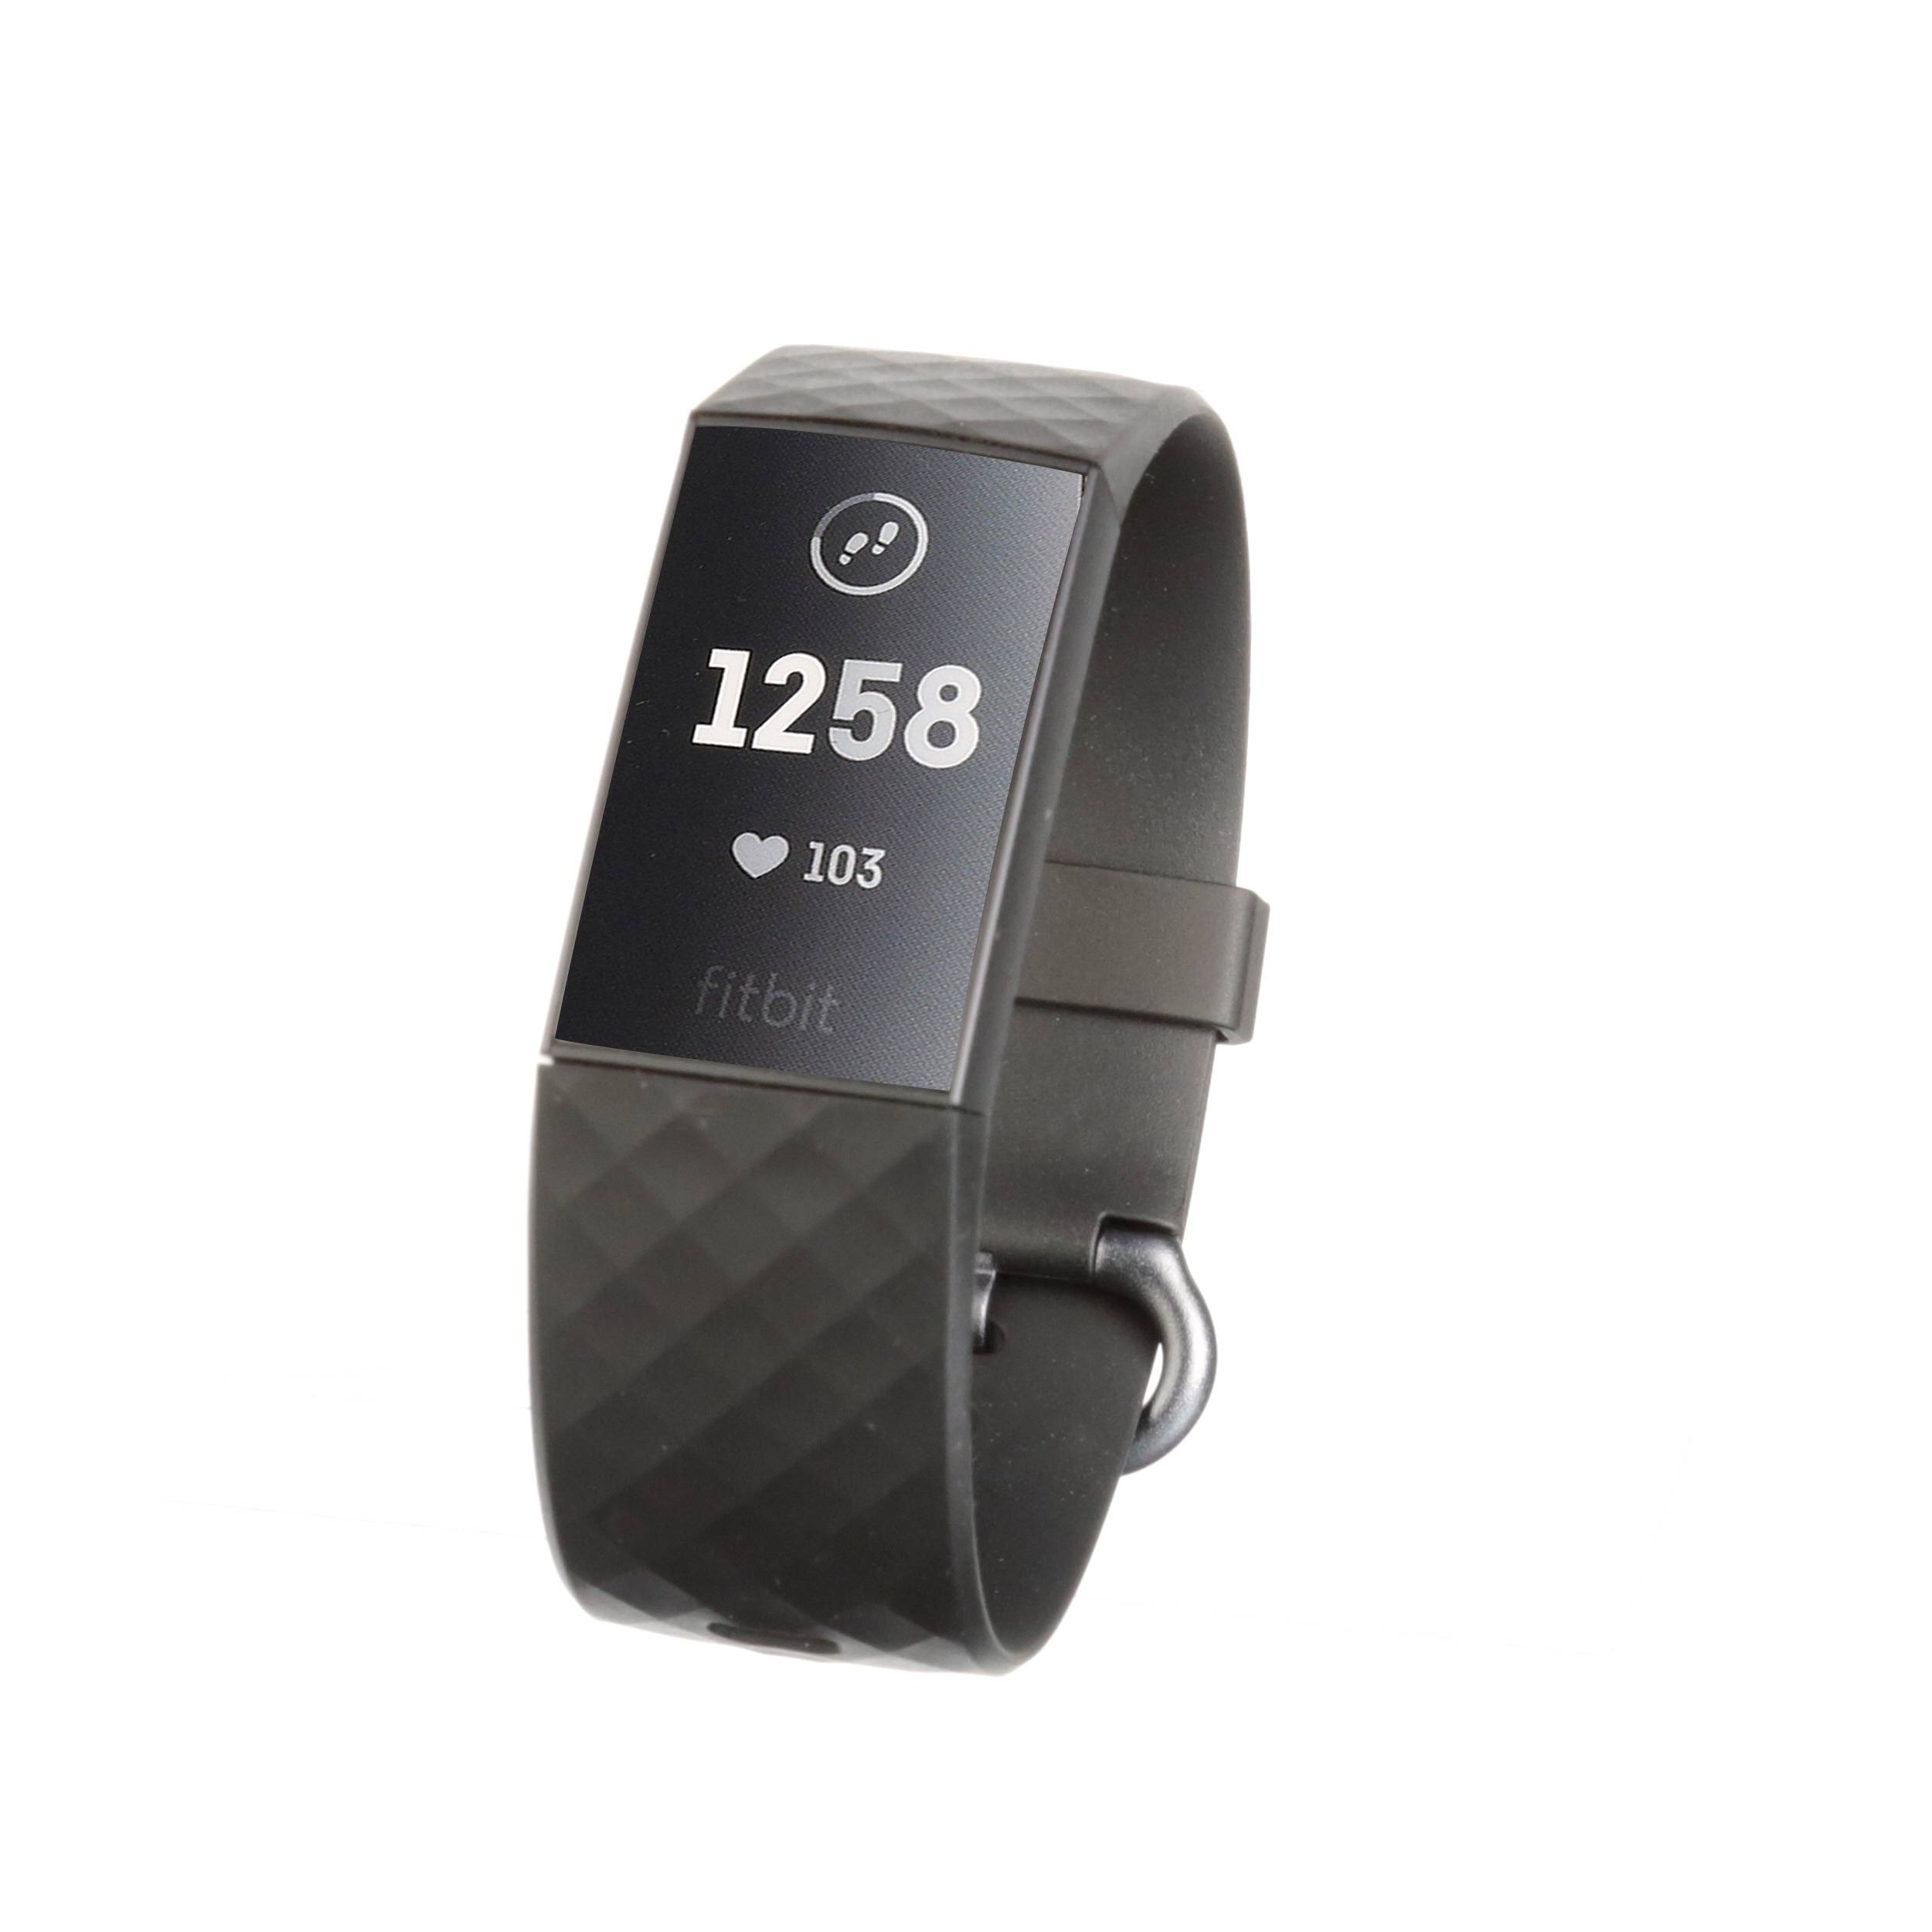 fitbit charge 3 walmart